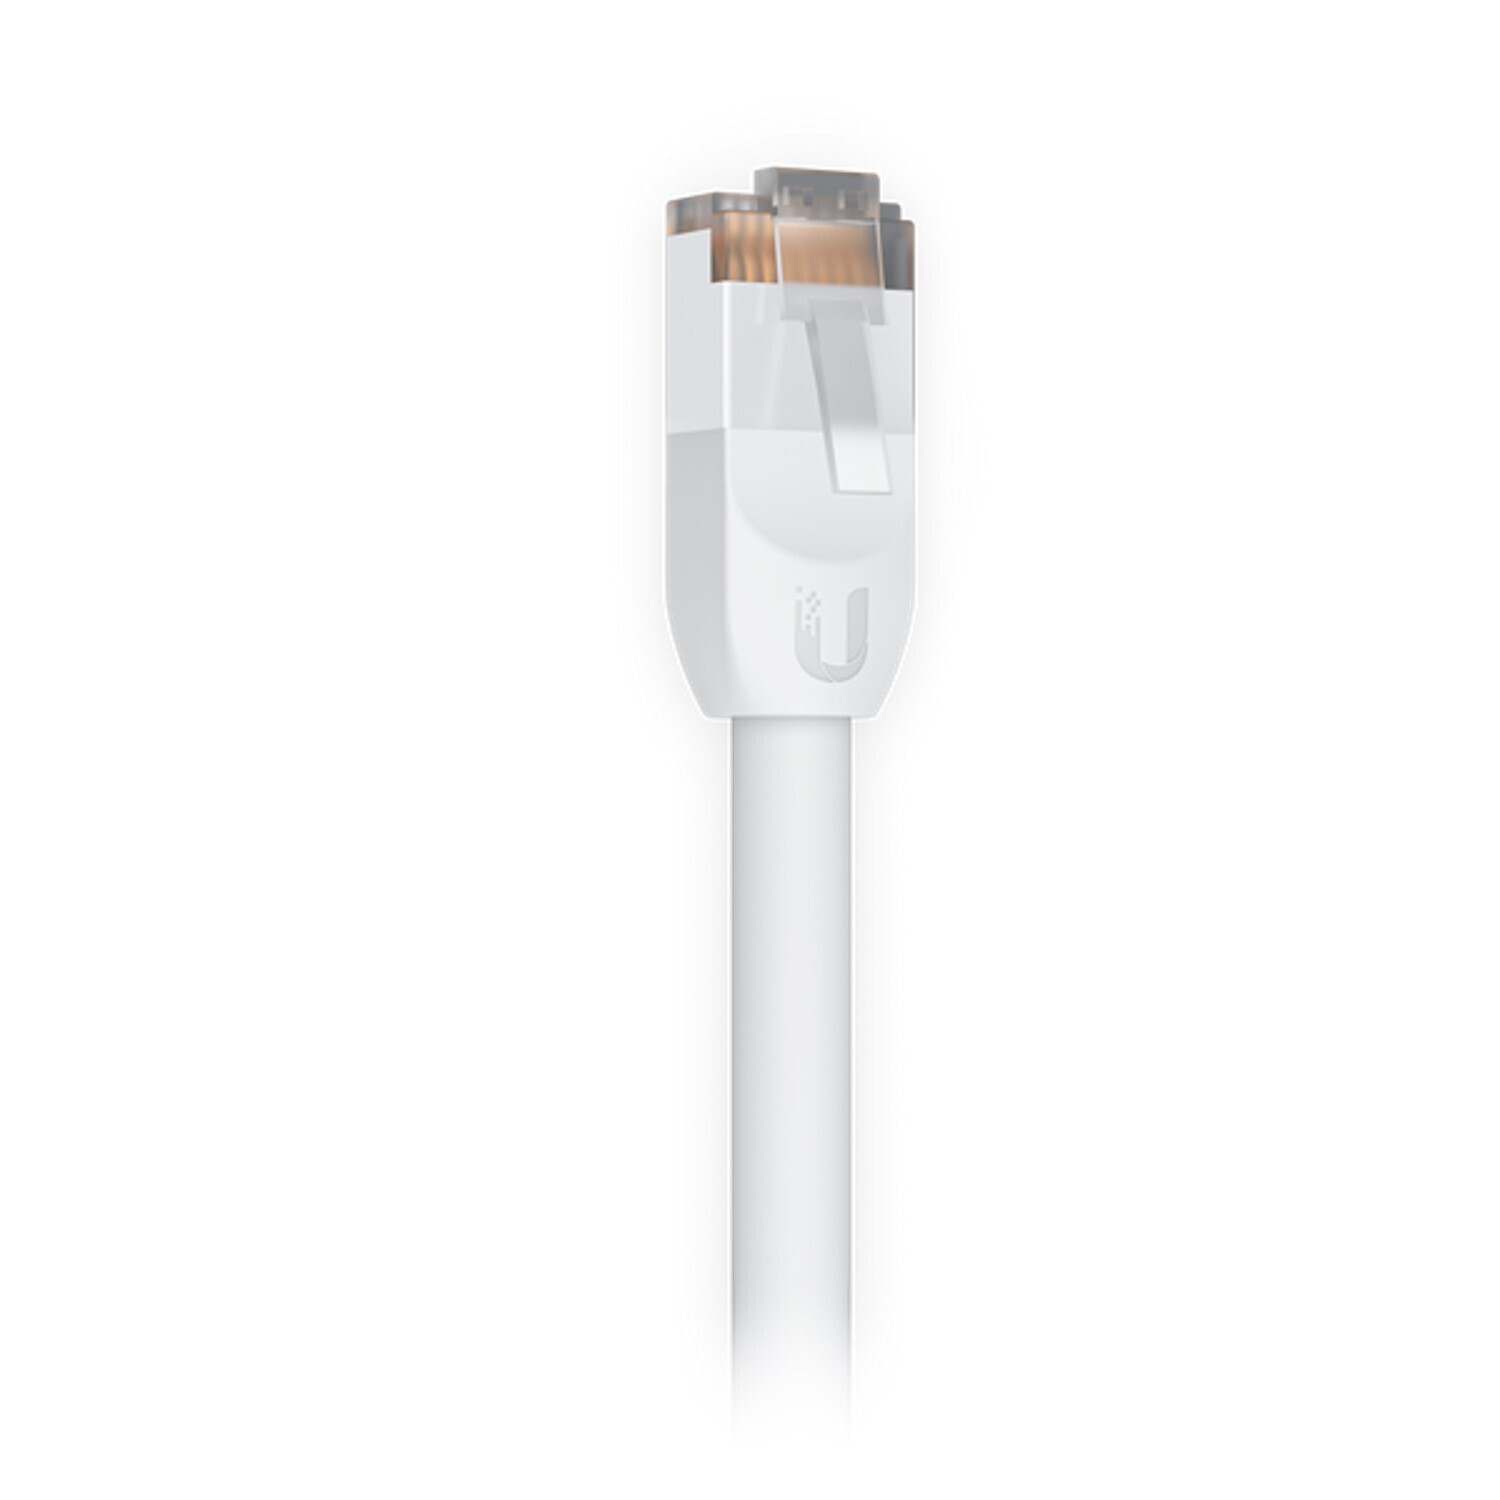 UniFi Patch Cable Outdoor 8M White, all-weather, RJ45 Ethernet Cable, Category 5e, Weatherproof